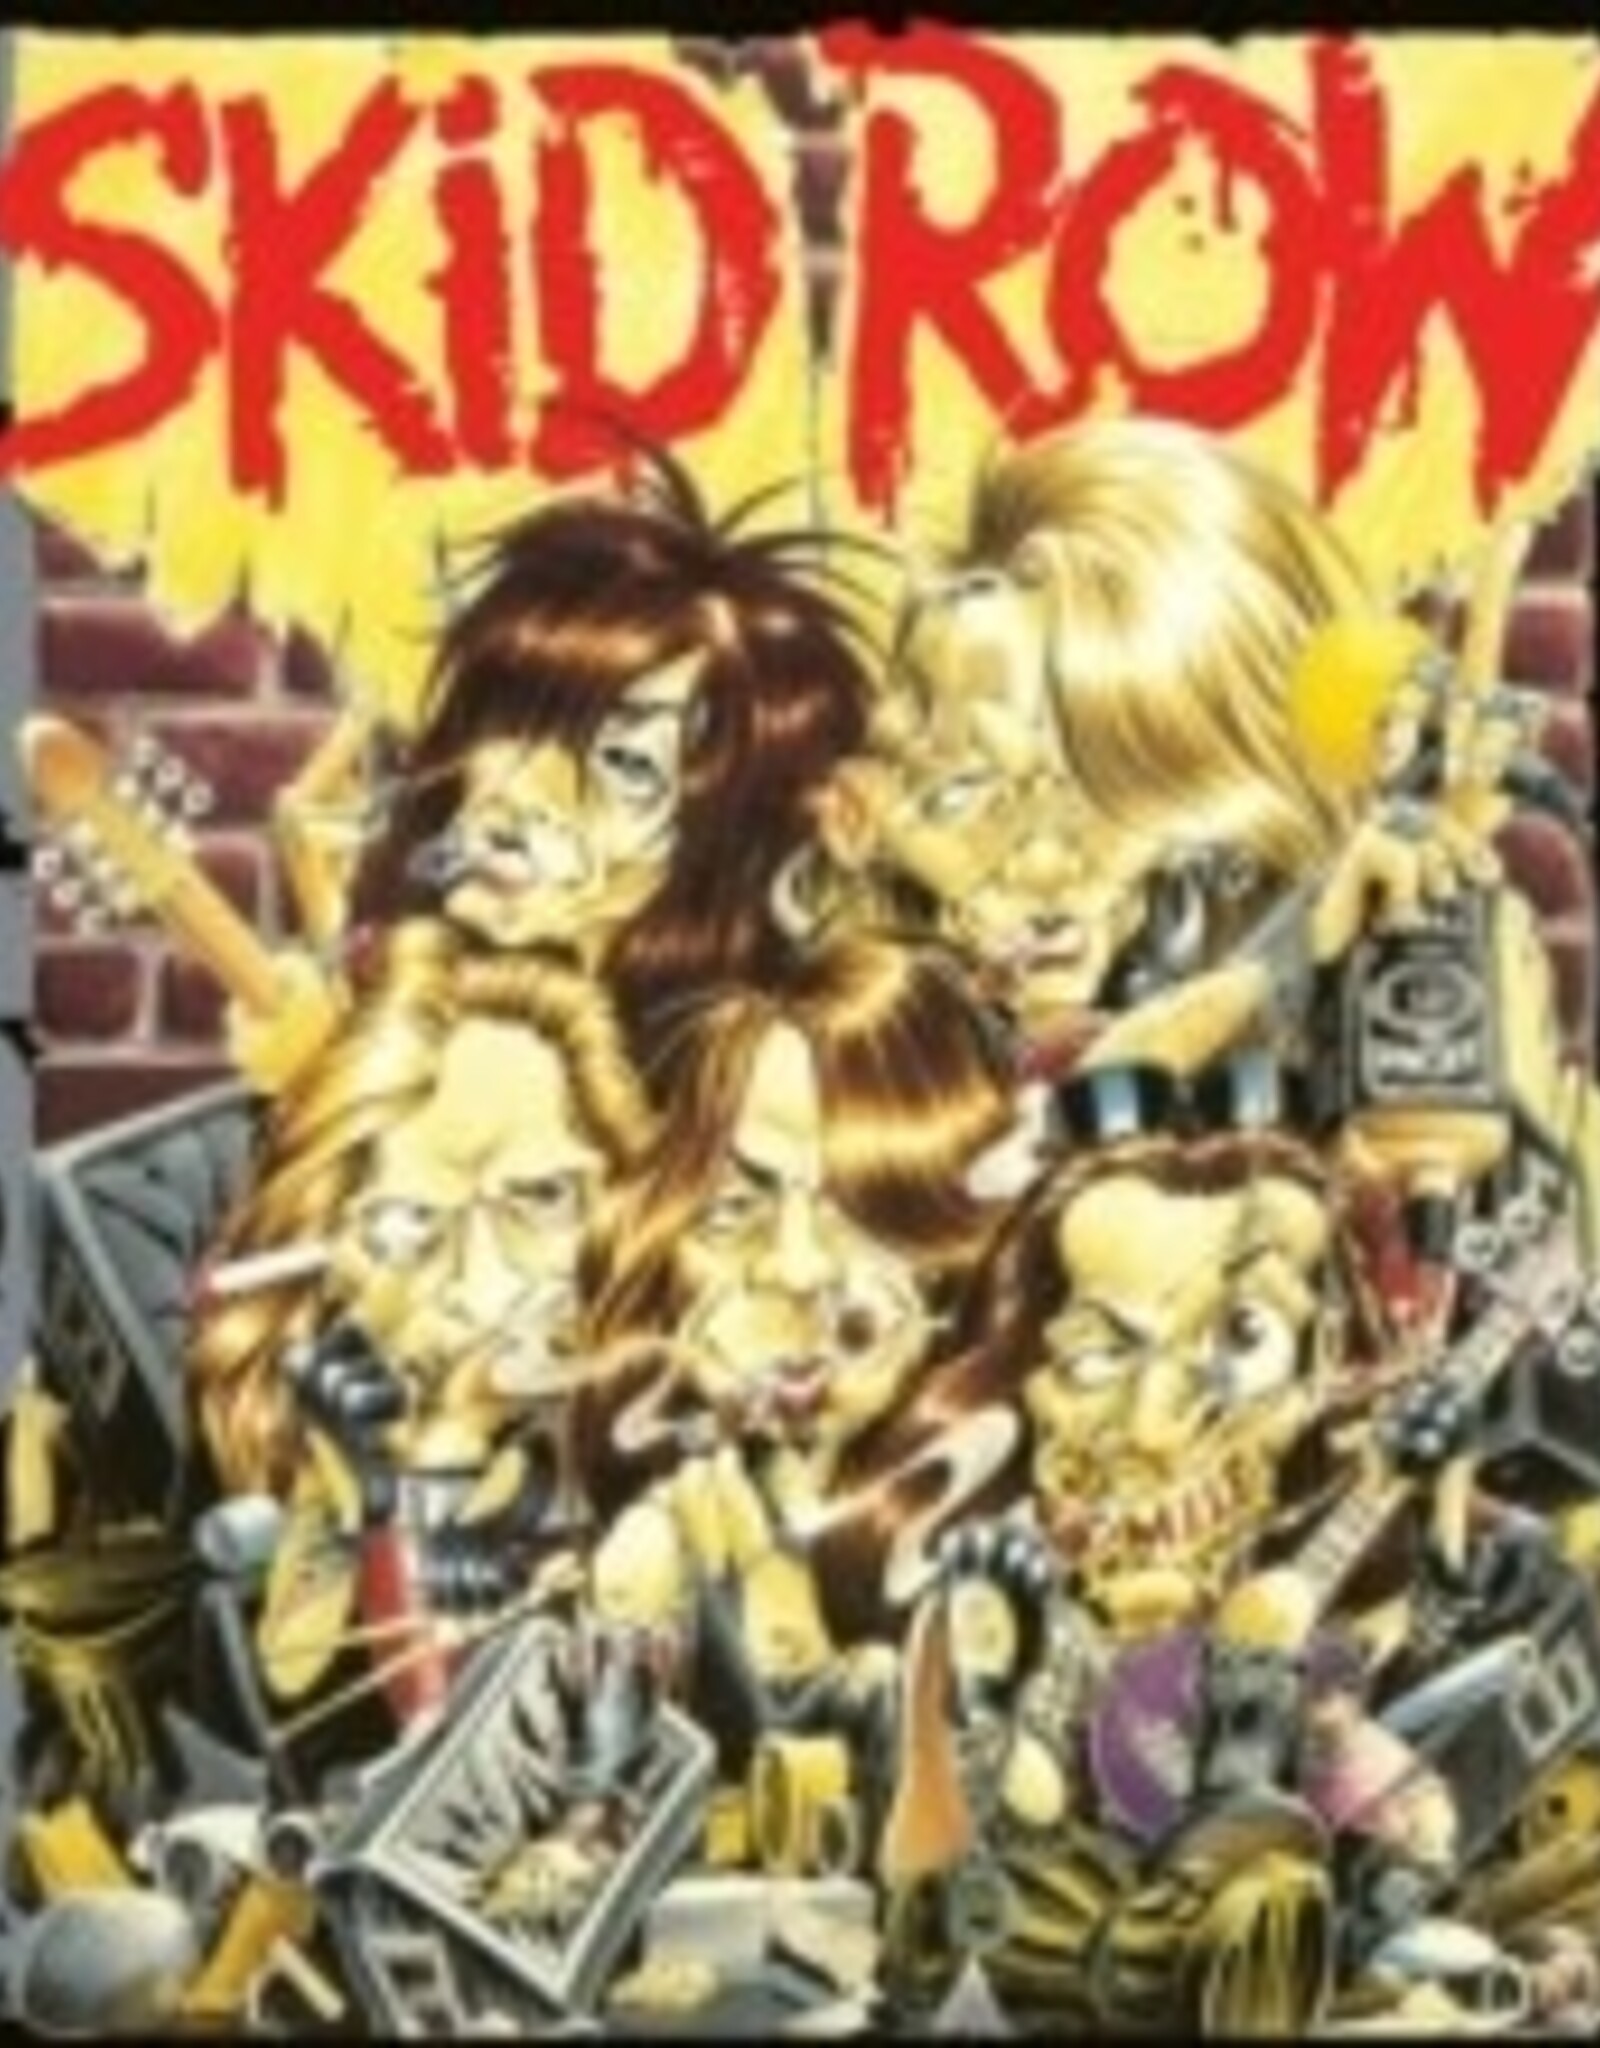 Skid Row	- B-Side Ourselves EP	(RSDBF 2023)